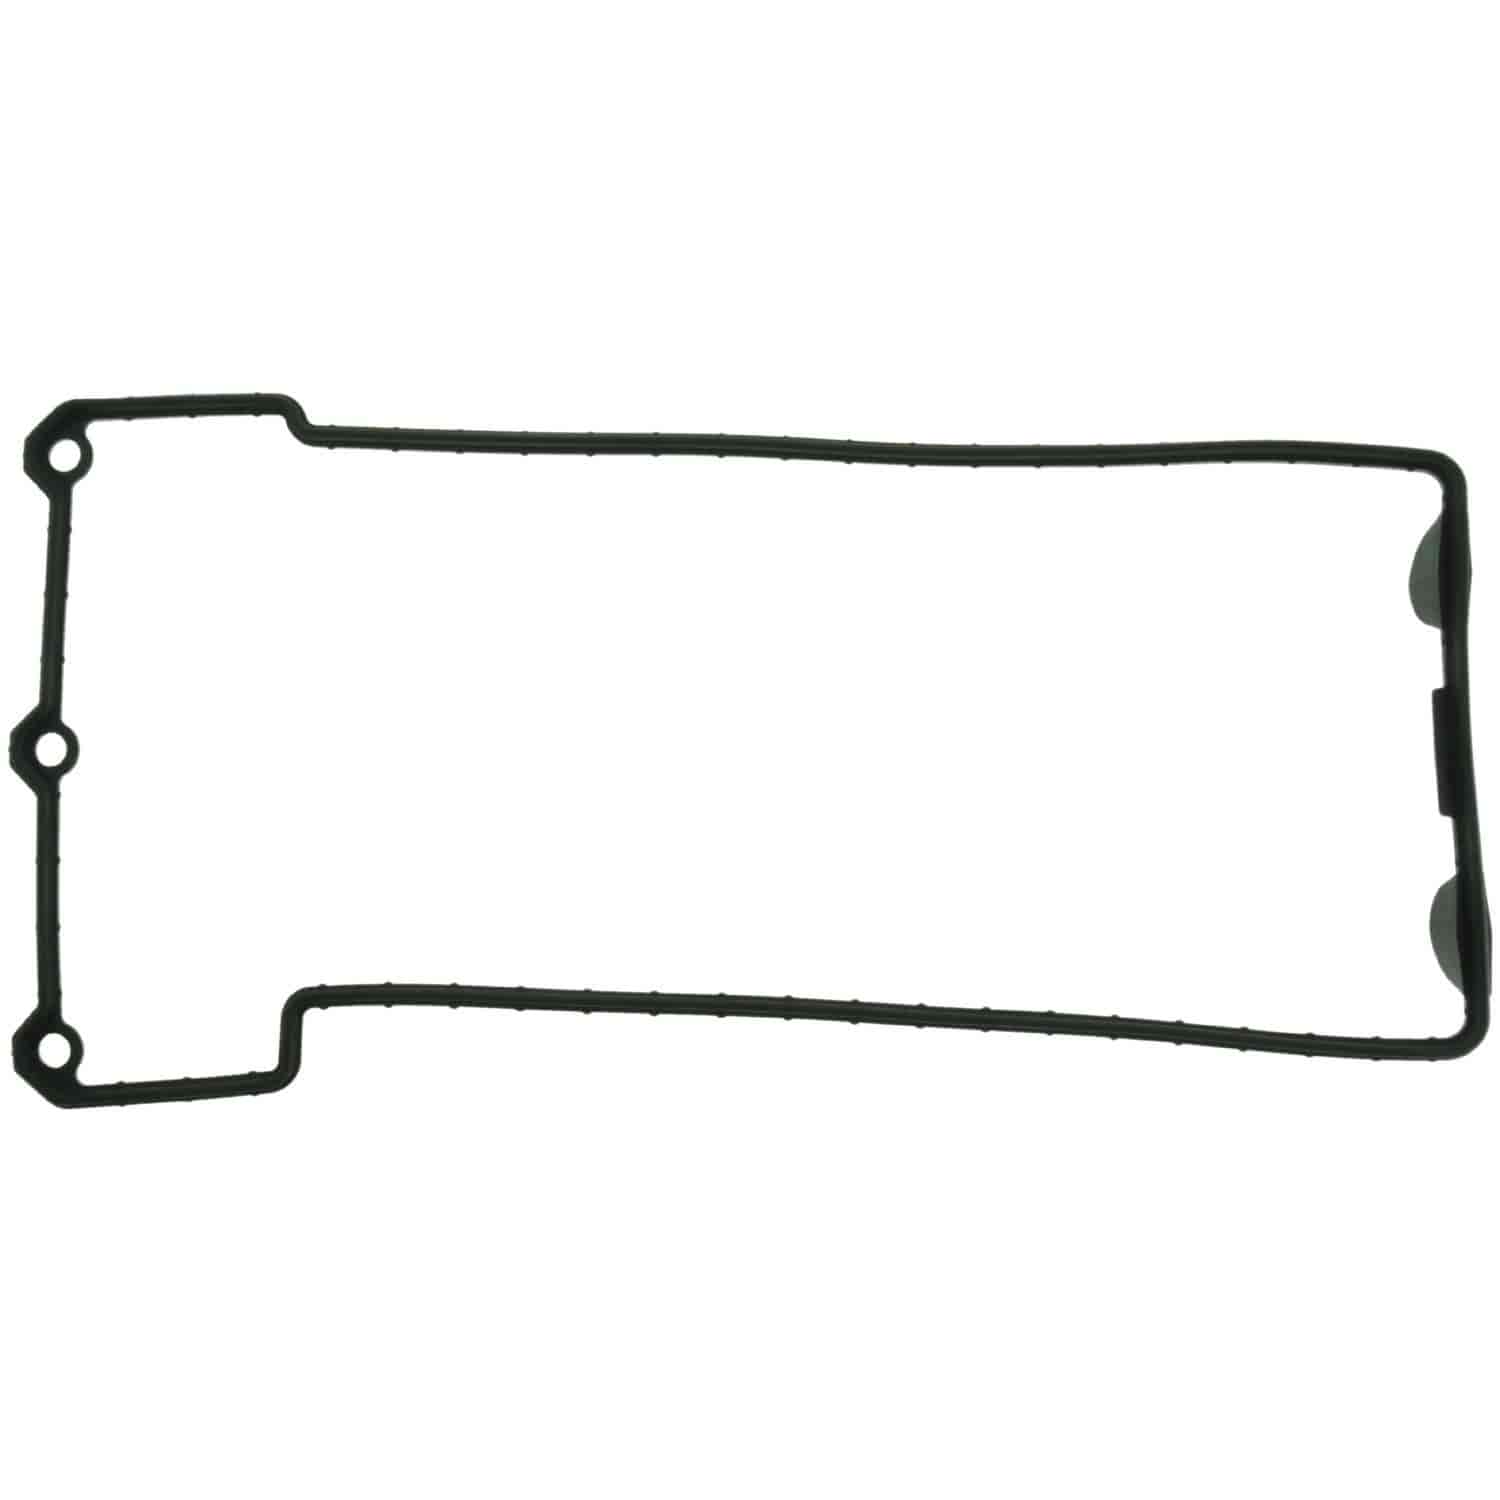 Valve Cover Gasket Right BMW M60 SERIES 1993-1998 TO 08/98